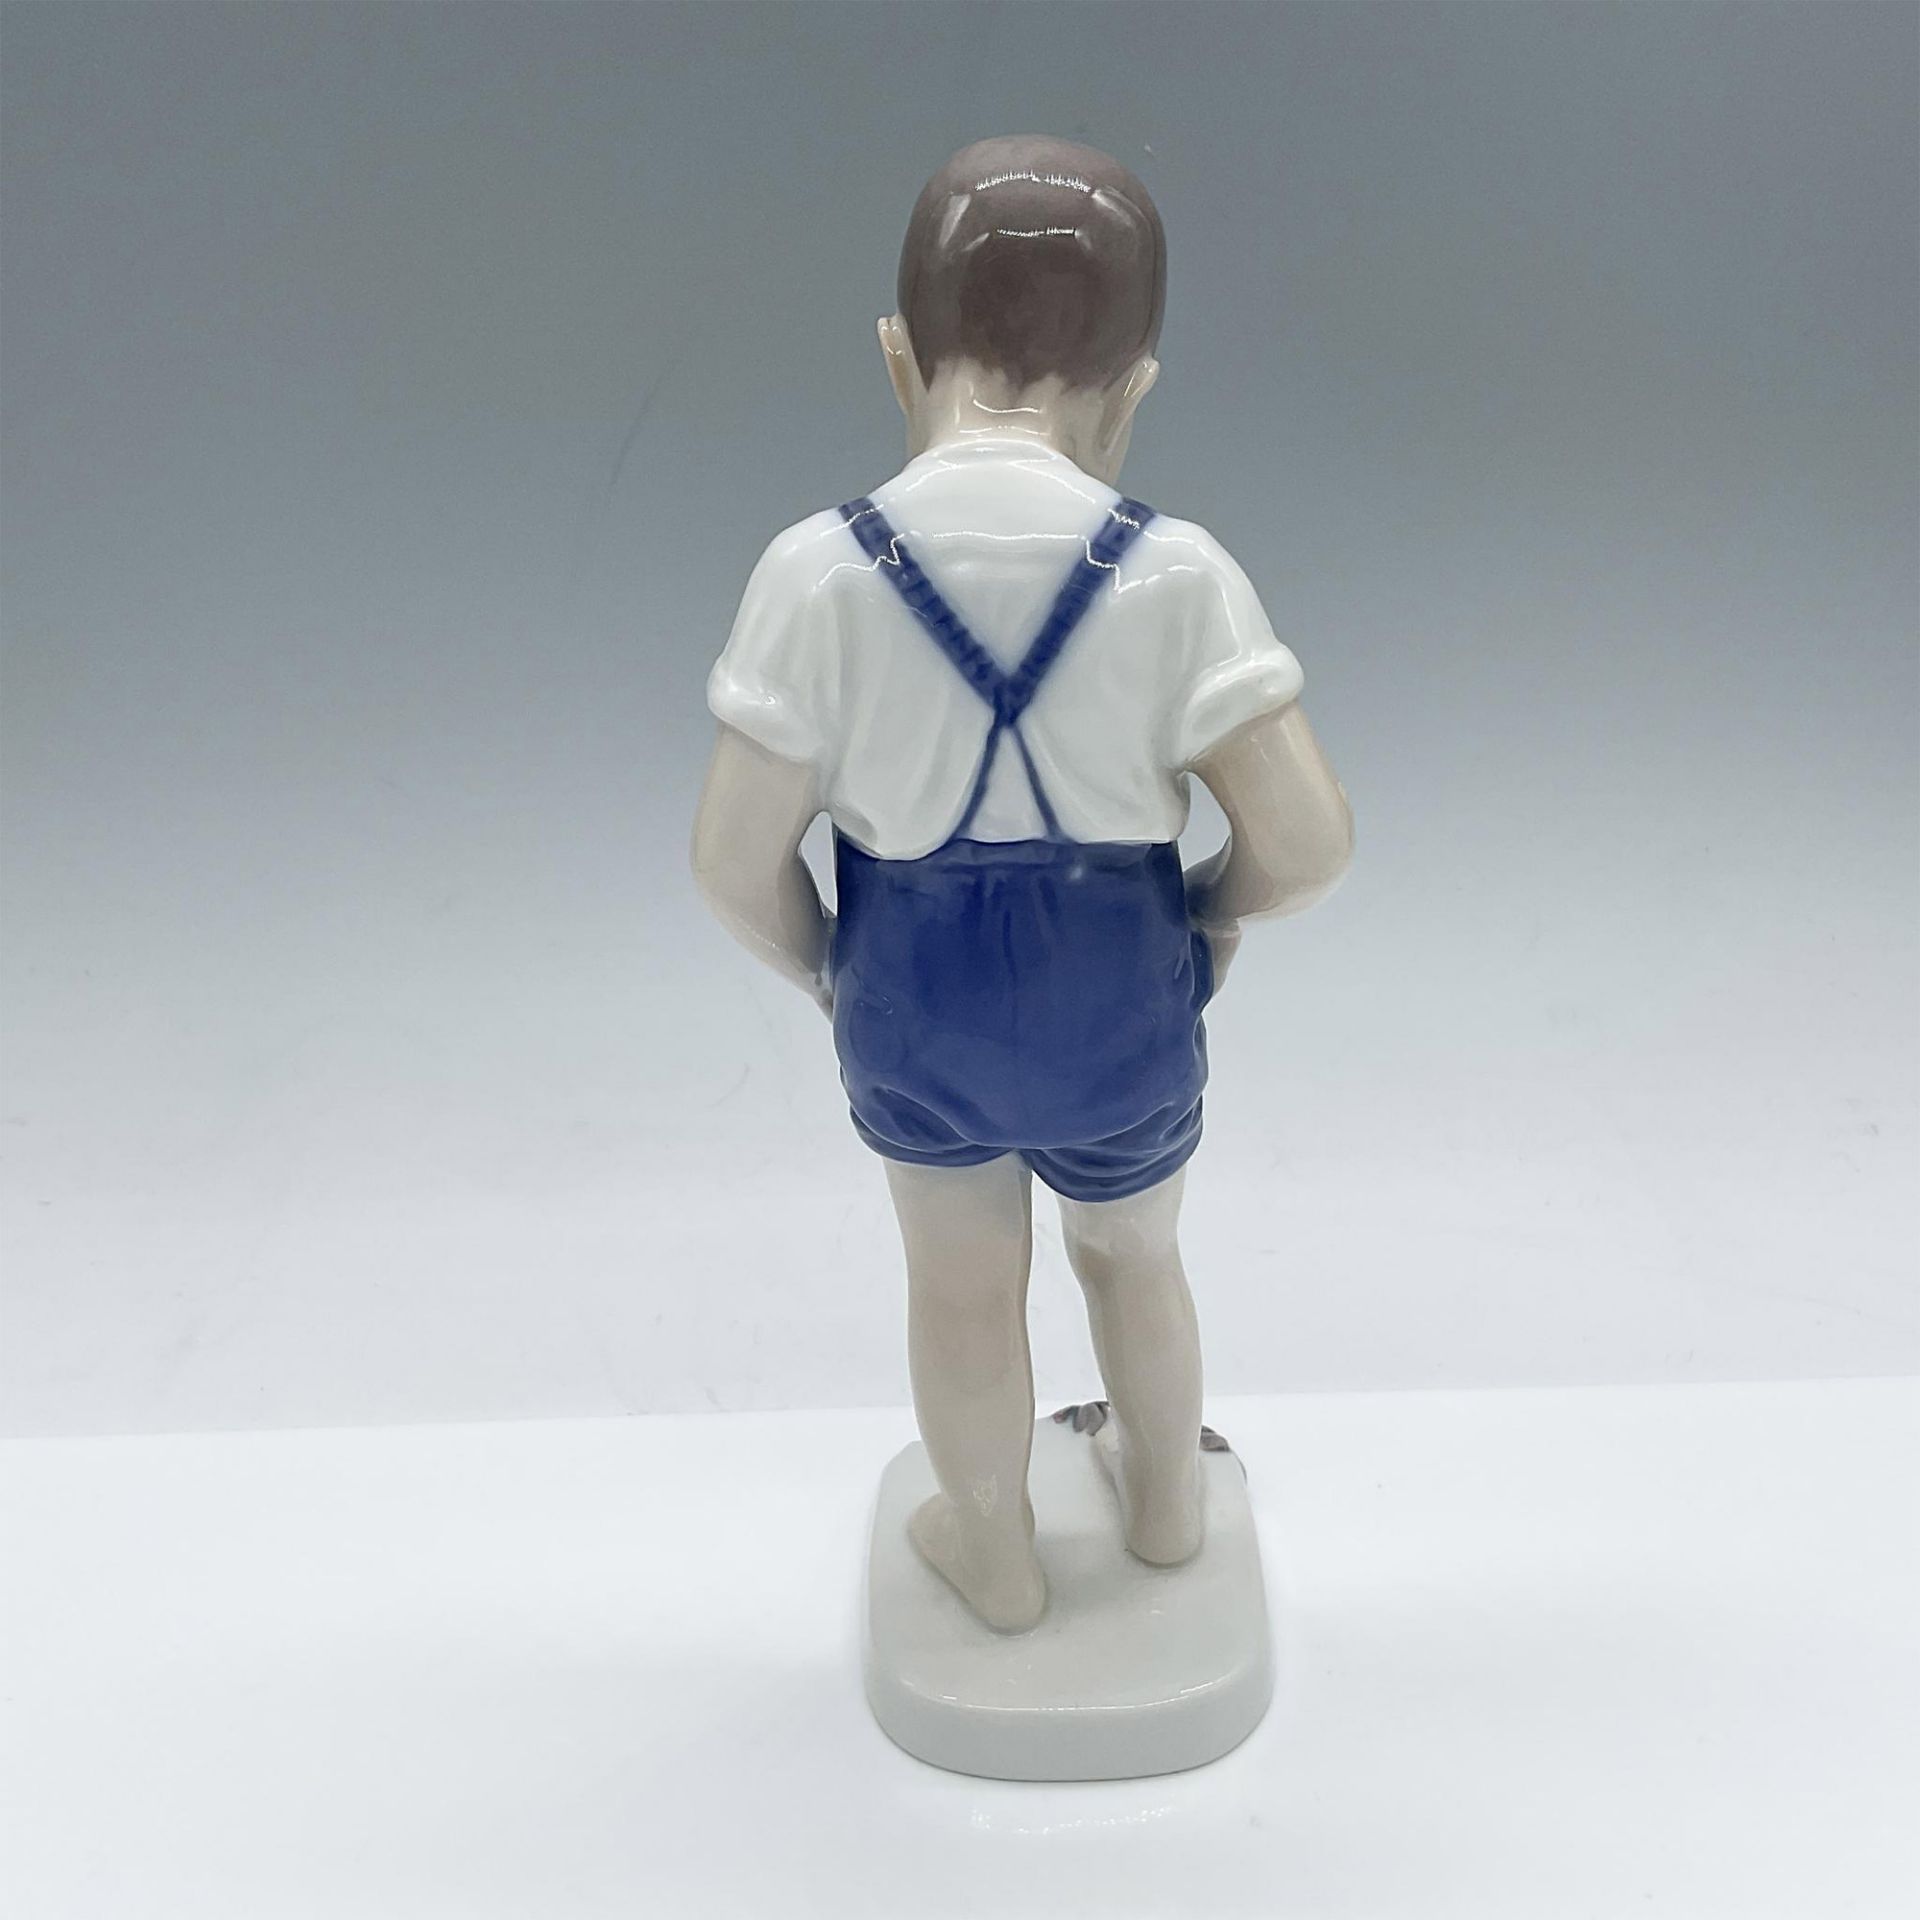 Bing & Grondahl Porcelain Figurine, Boy with Crab 1870 - Image 2 of 3